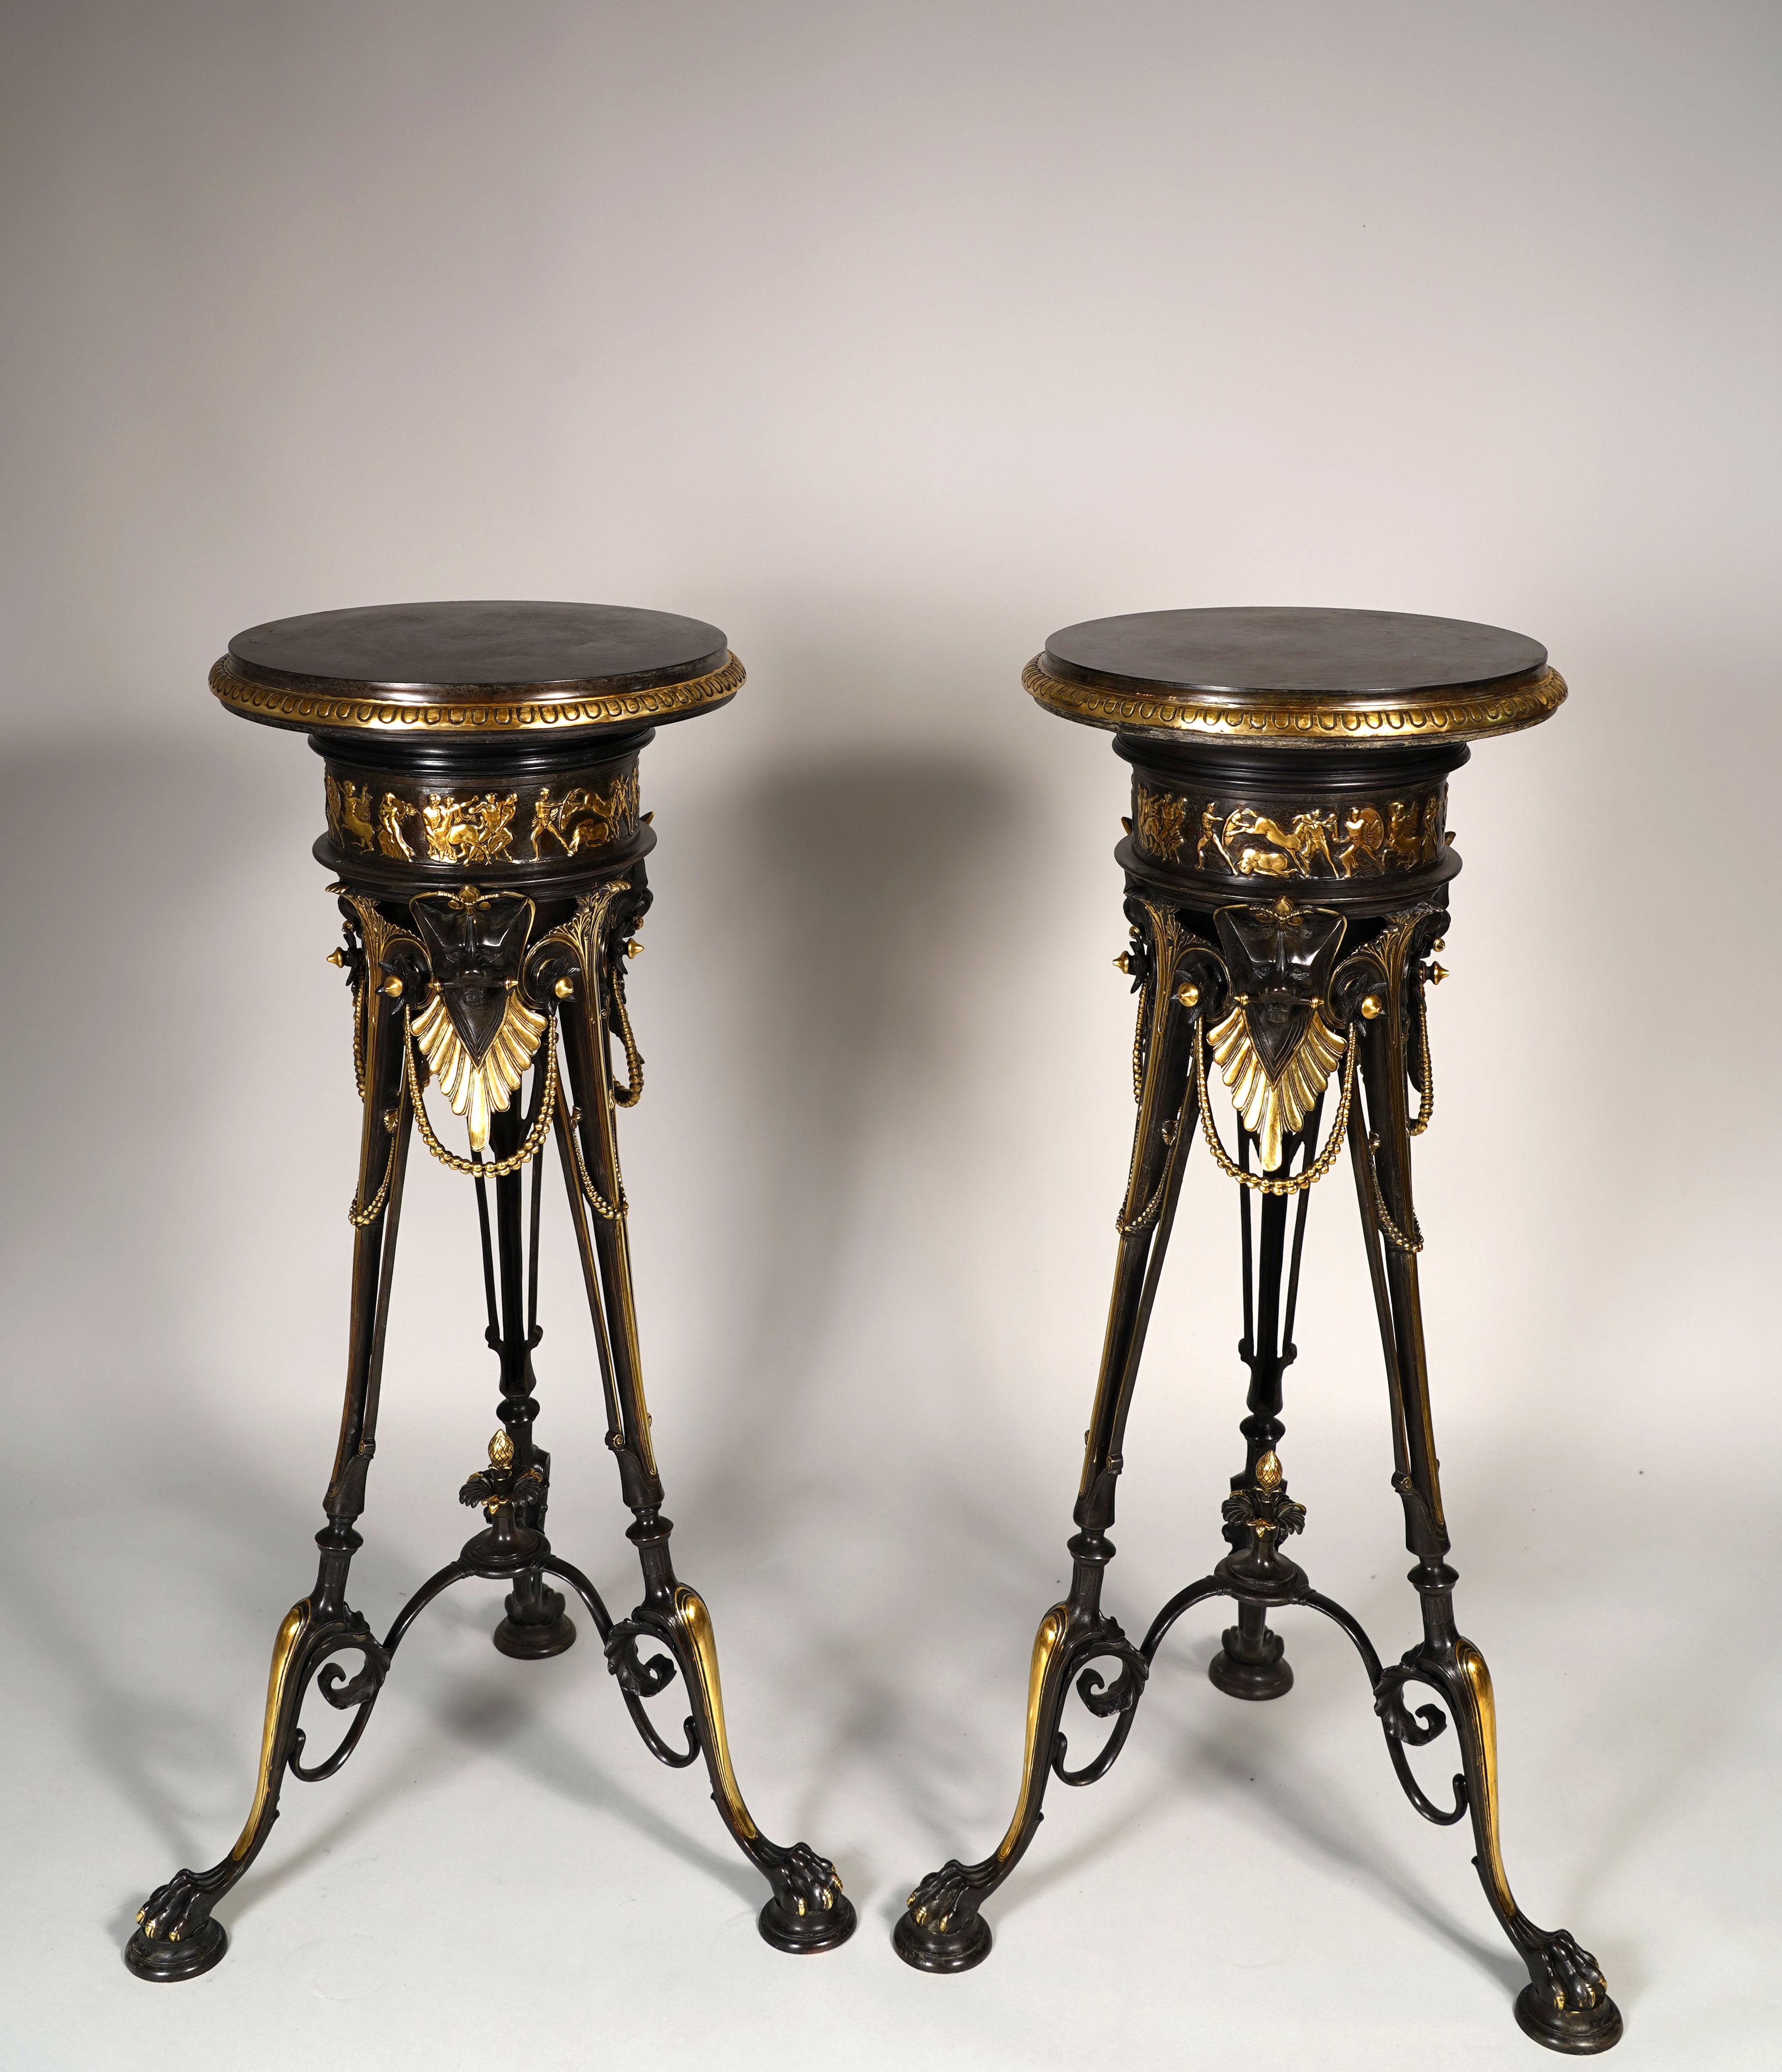 Pair of patinated and gilded bronze turntable pedestals with for each of them, three paw feet, headed by stylized lion muzzles, ornated with beaded chains and joined by a fine foliate stretcher. The belt is adorned by a banded frieze cast in